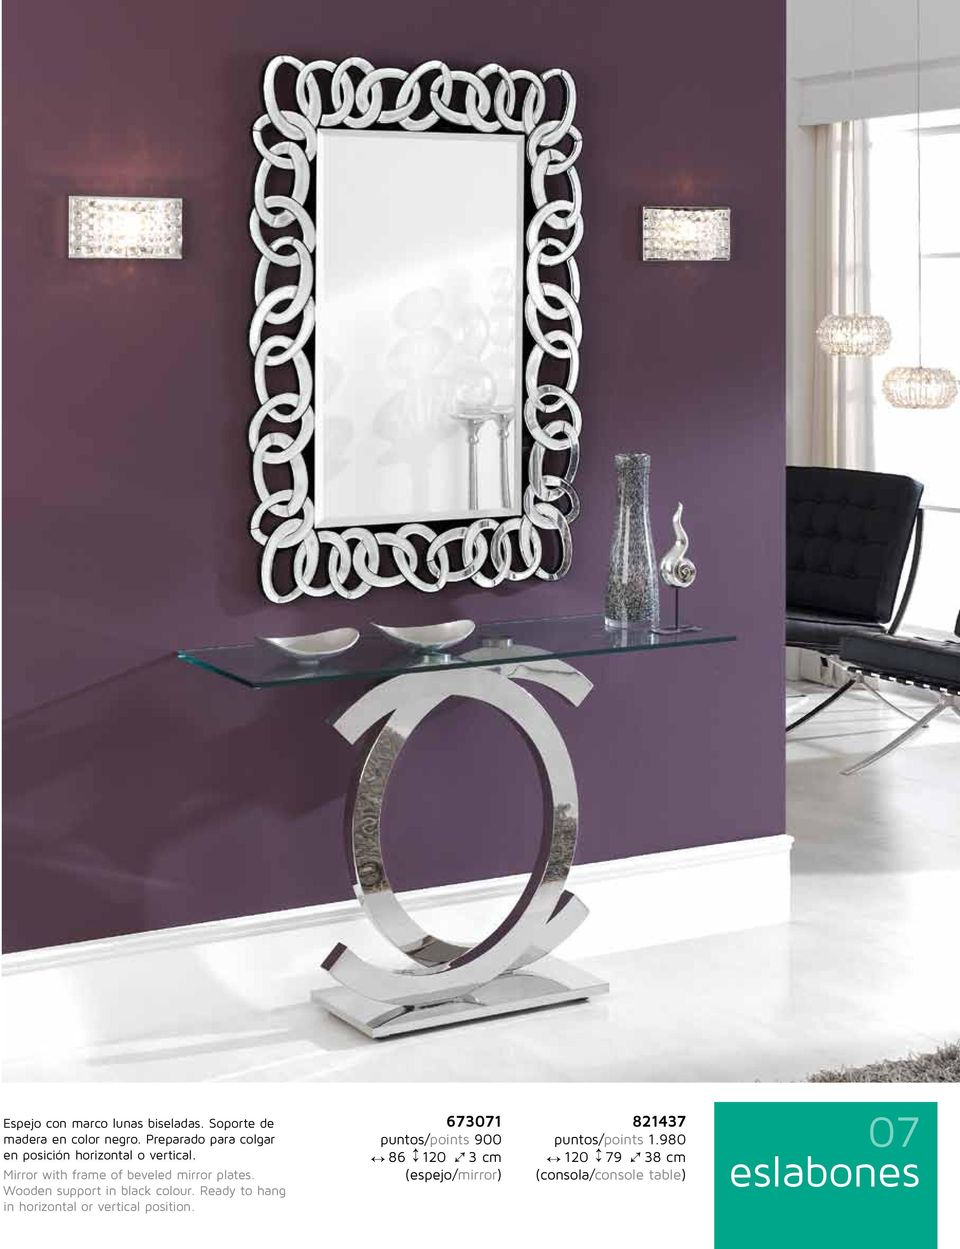 Mirror with frame of beveled mirror plates. Wooden support in black colour.